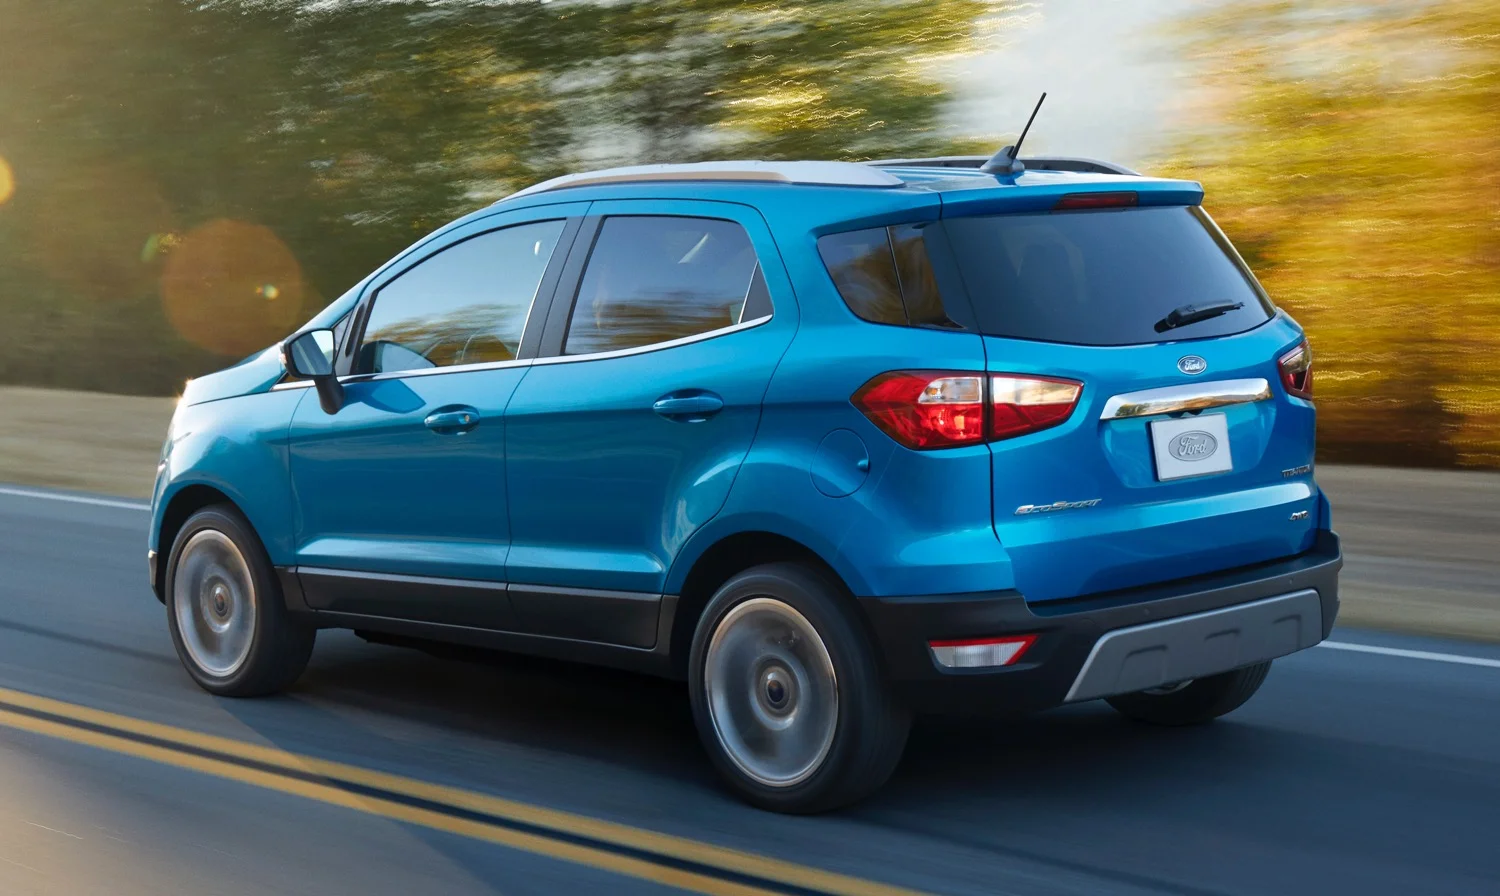 Ford EcoSport Among Top Used Cars With Biggest Price Drops